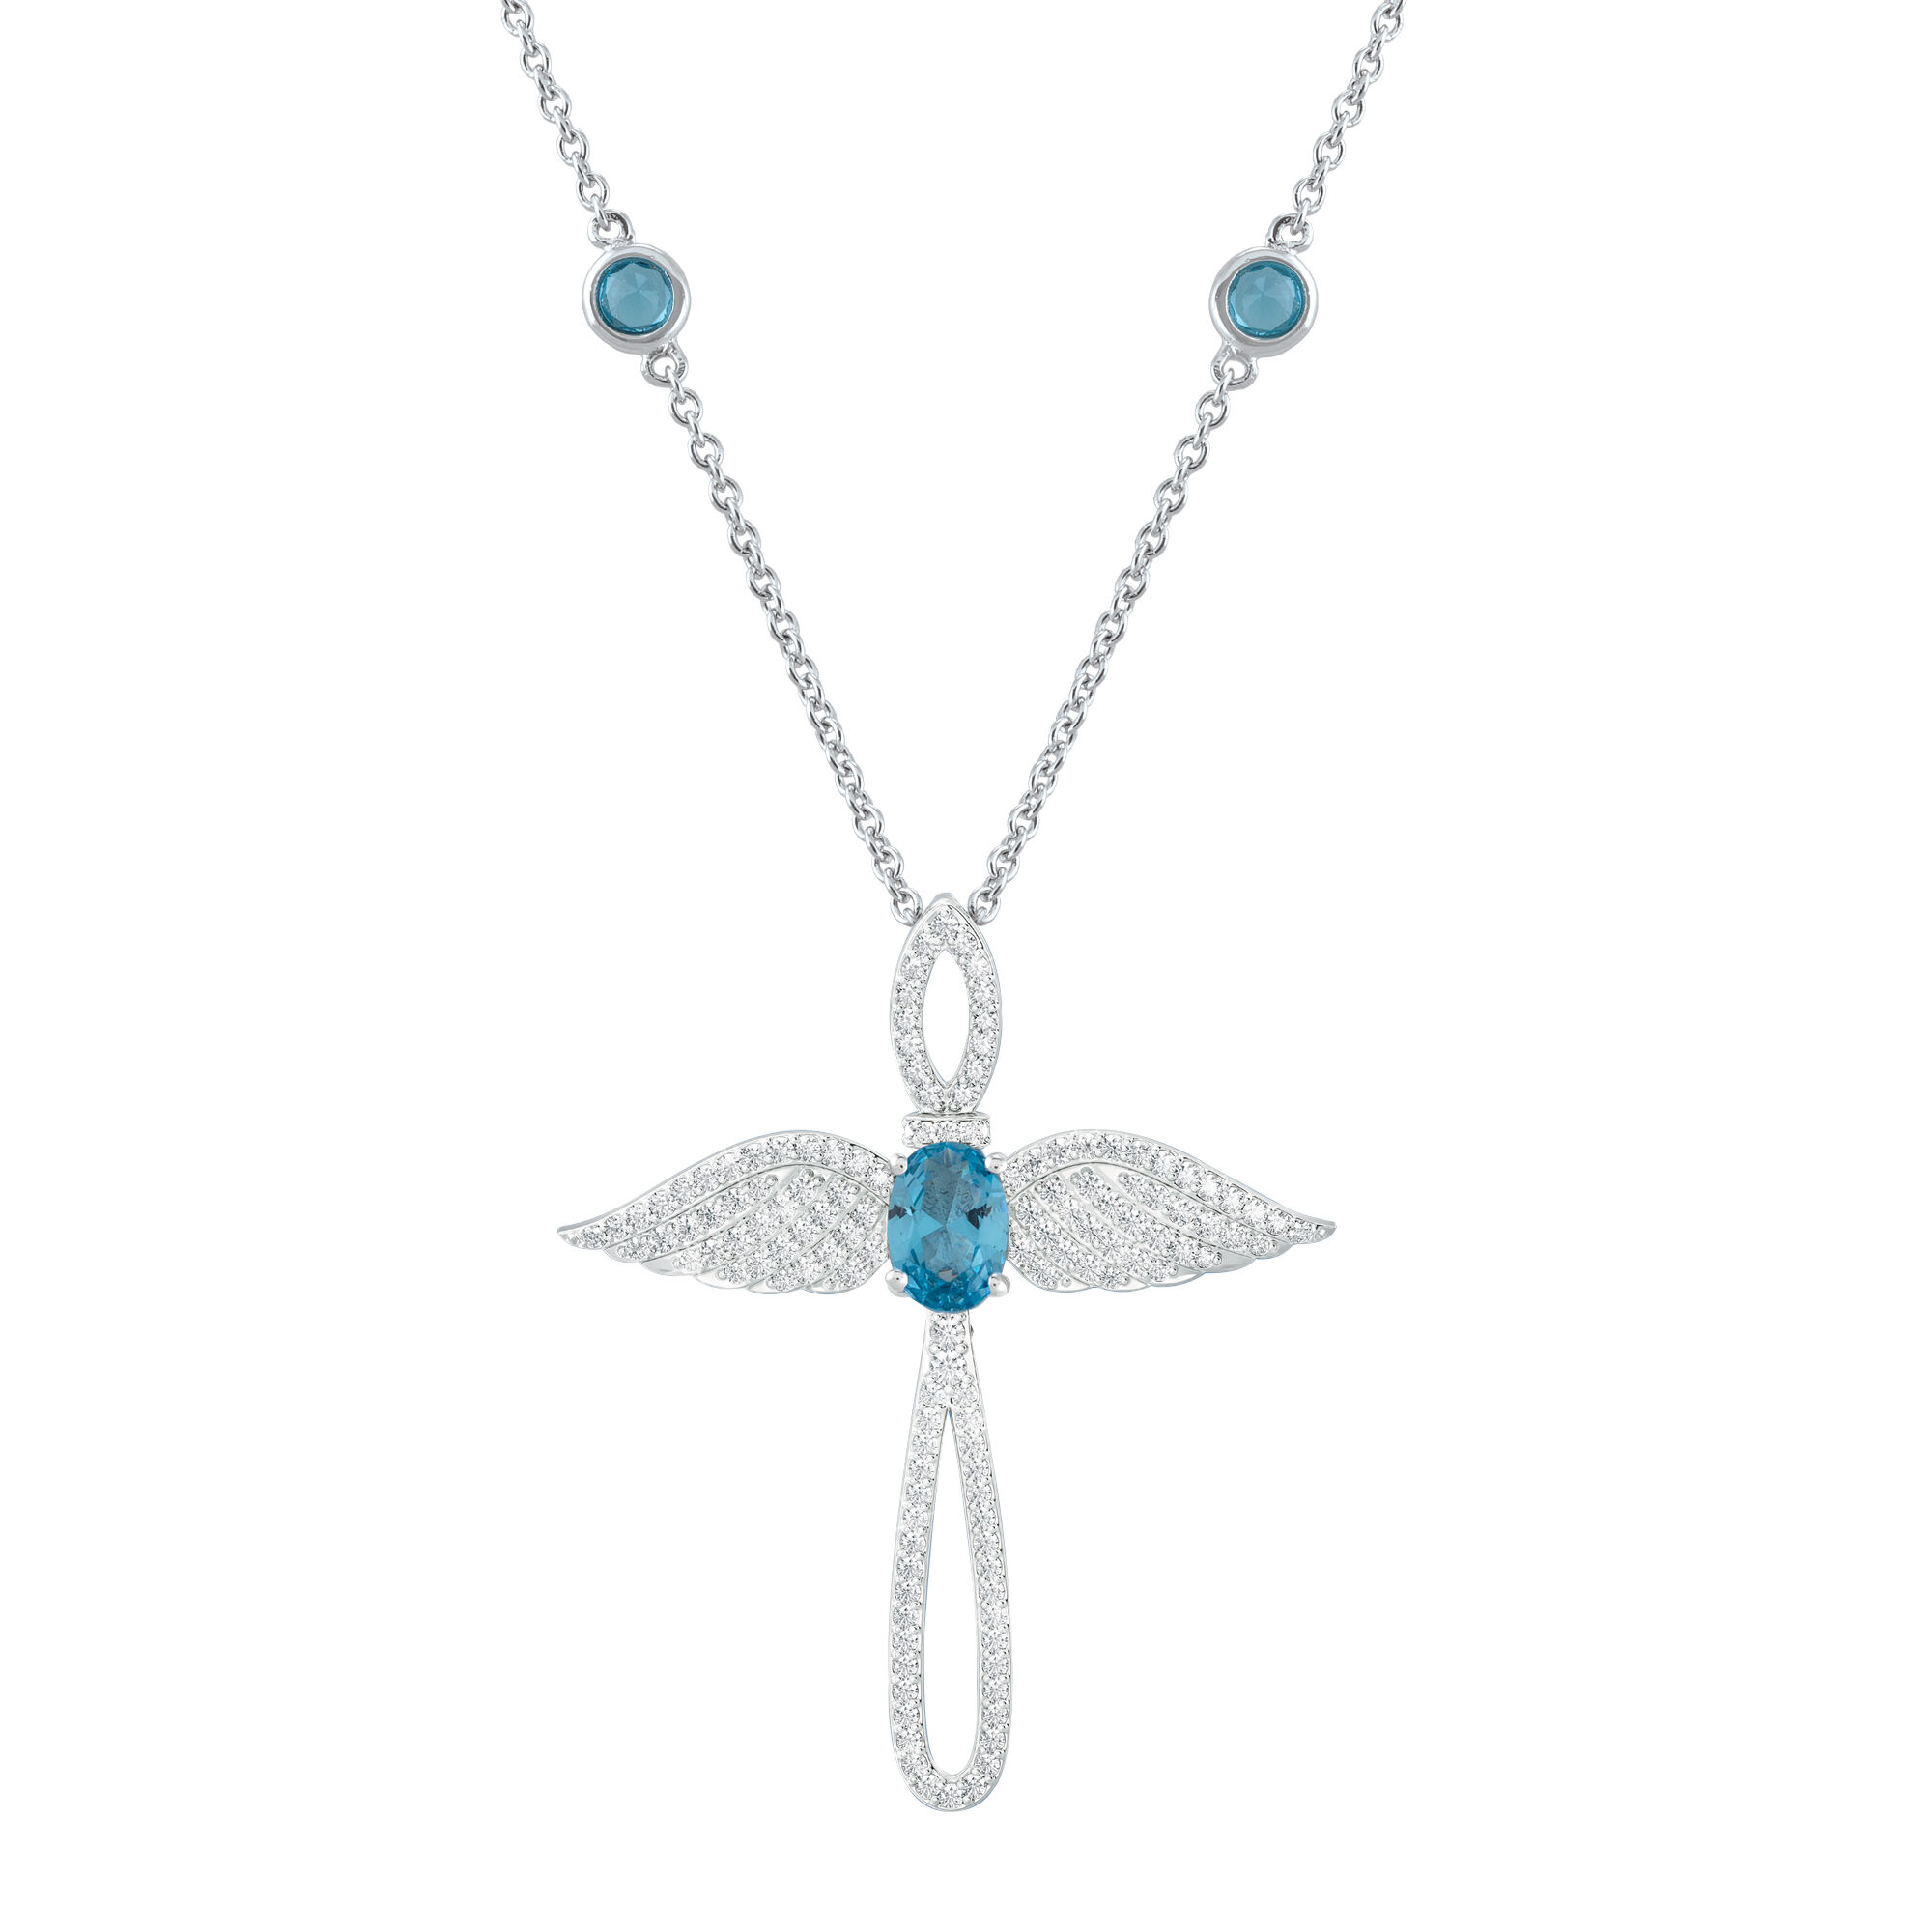 Touched by an Angel Birthstone Necklace 6842 0017 l december